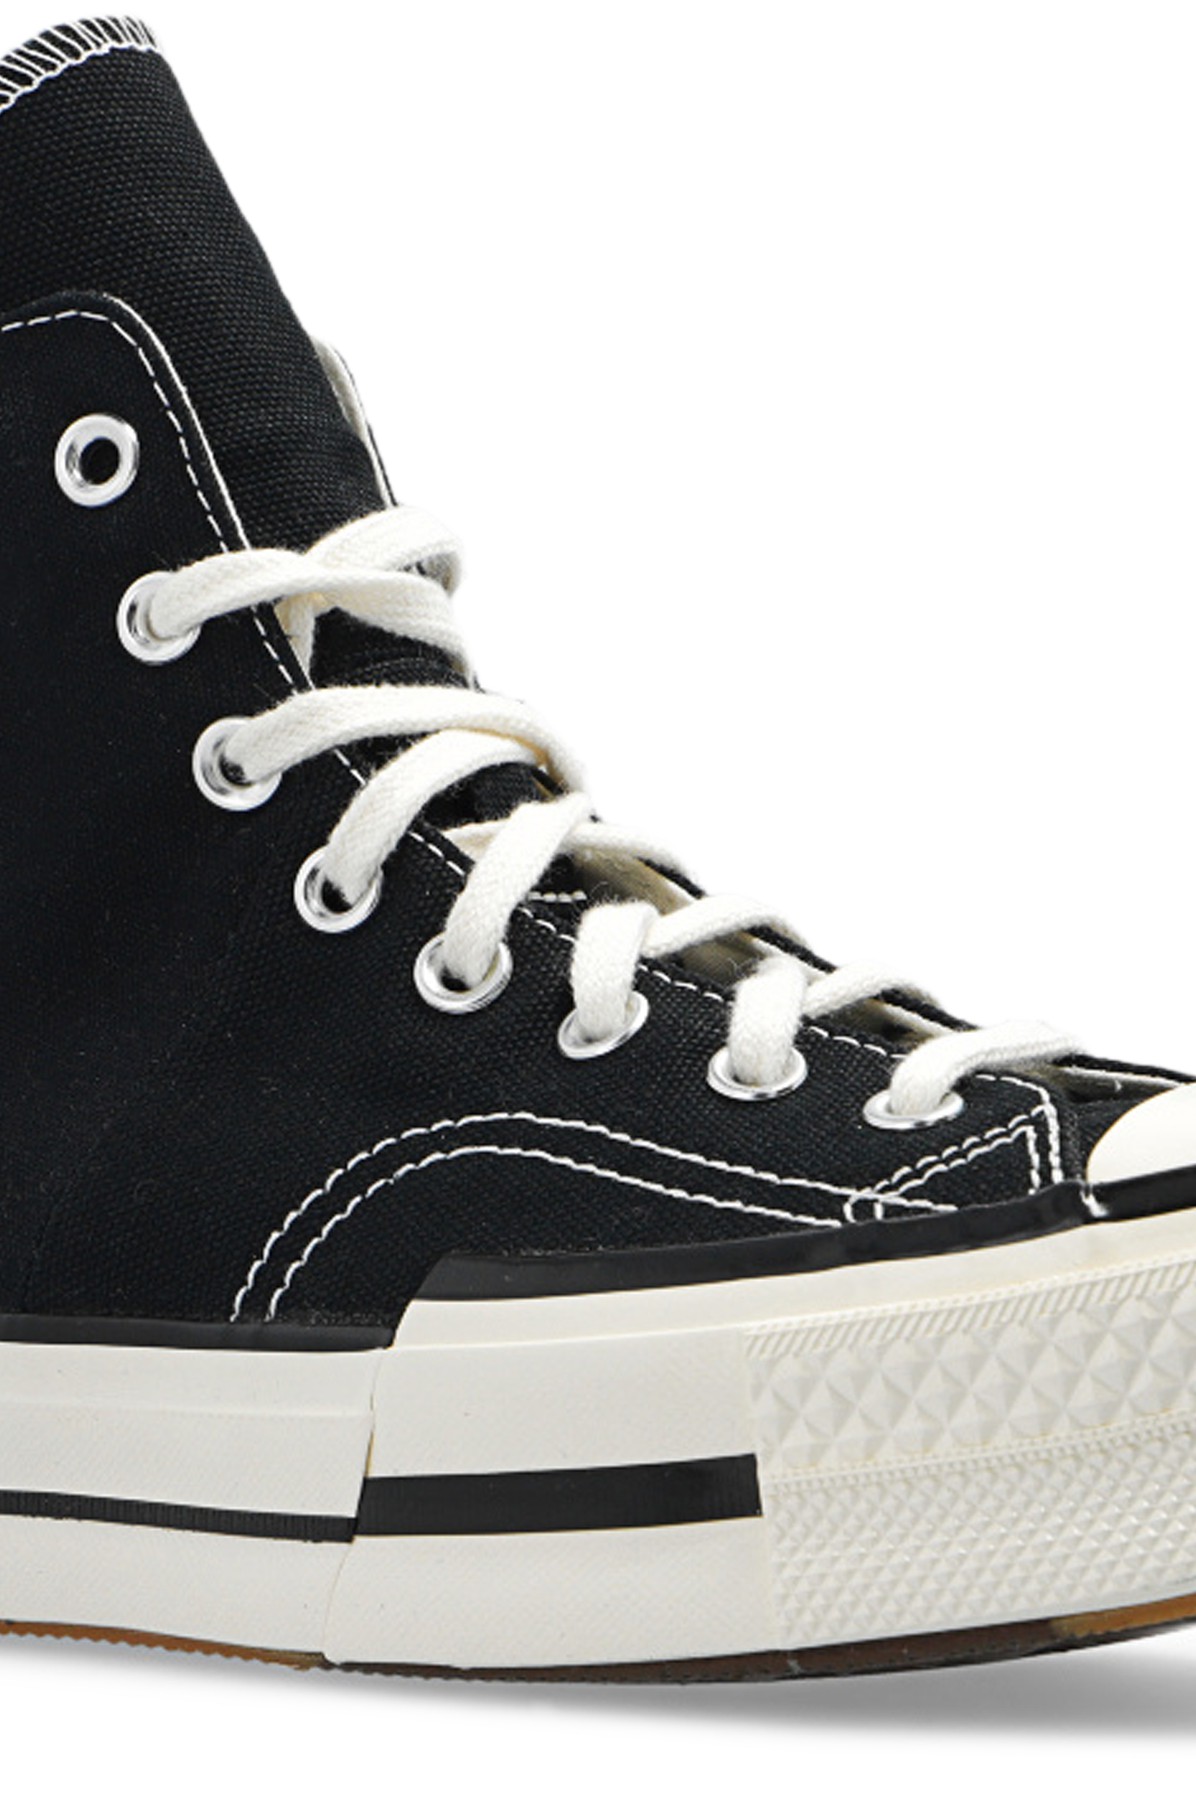 Converse Chuck 70 Plus high-top sneakers